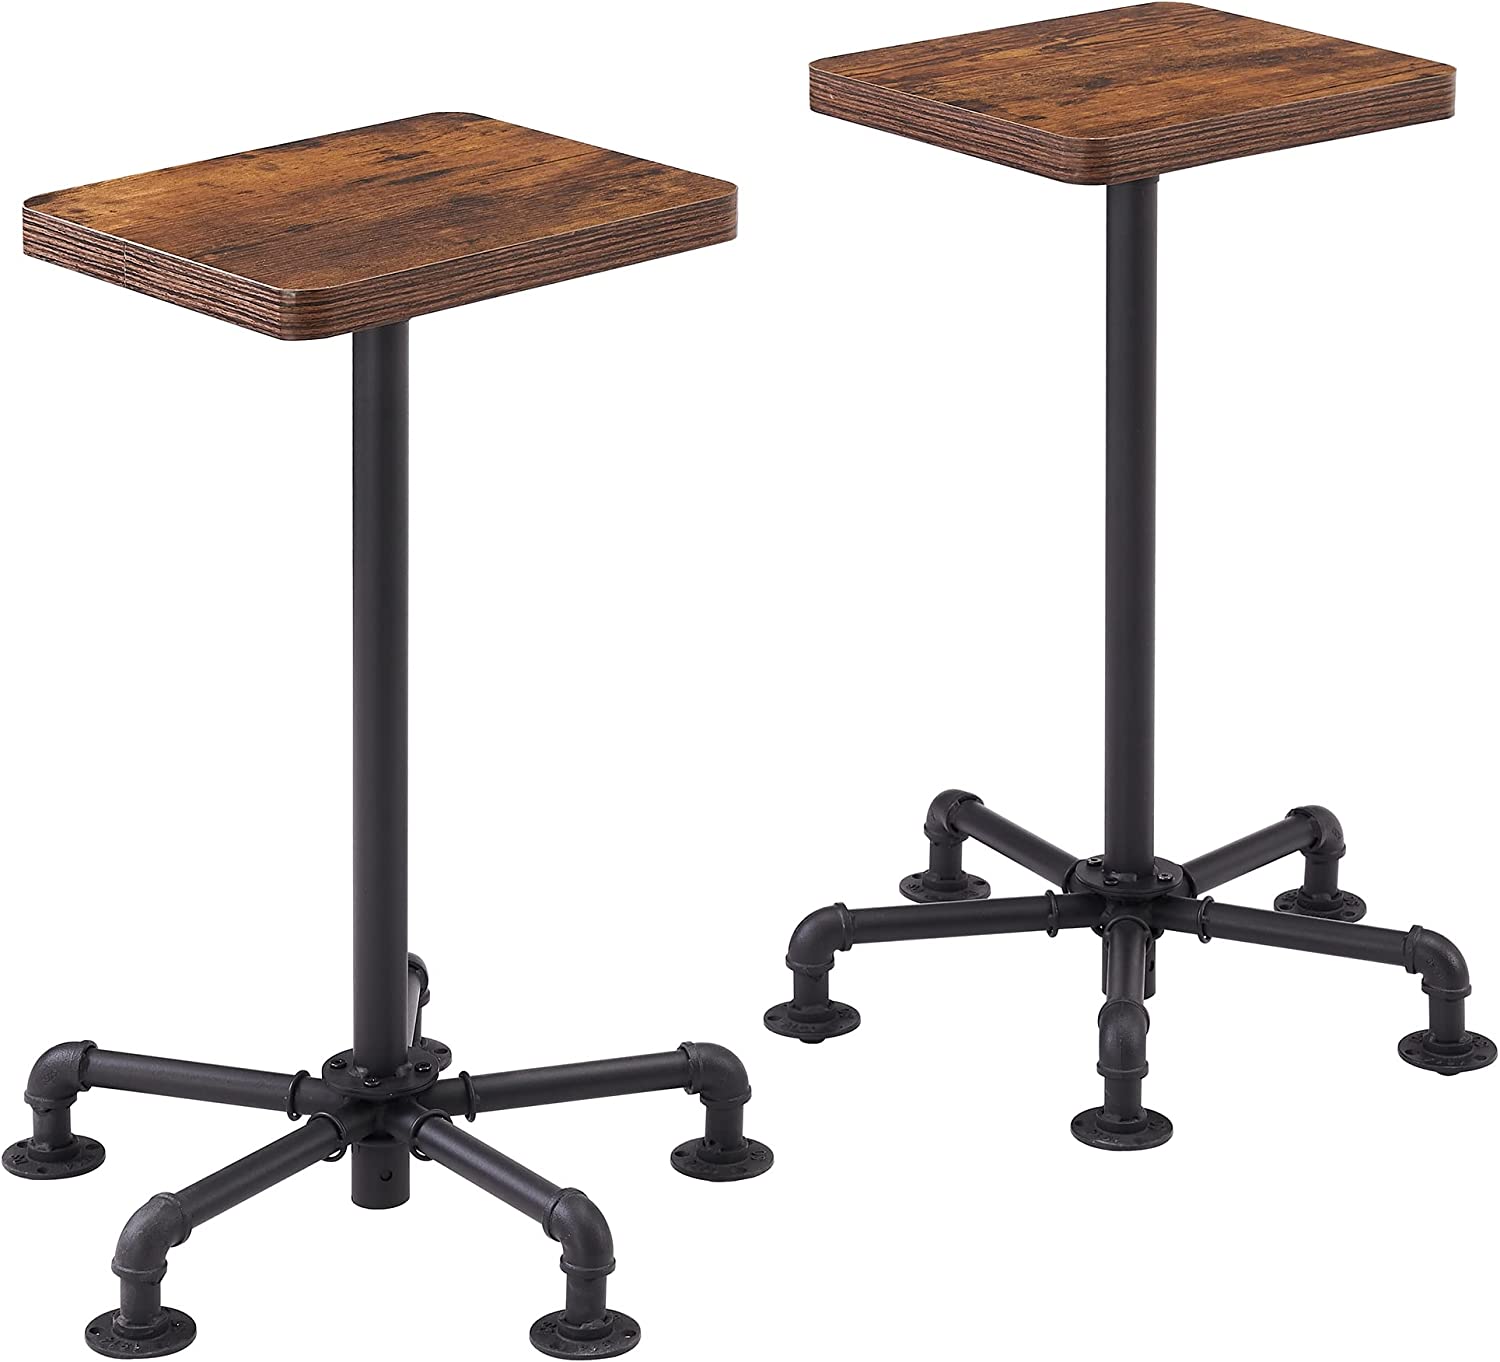 VECELO Counter Height Bar Stools Set of 2, Barstool with Back Legs, Dining Chairs for Home and Kitchen Dining Room Restaurant